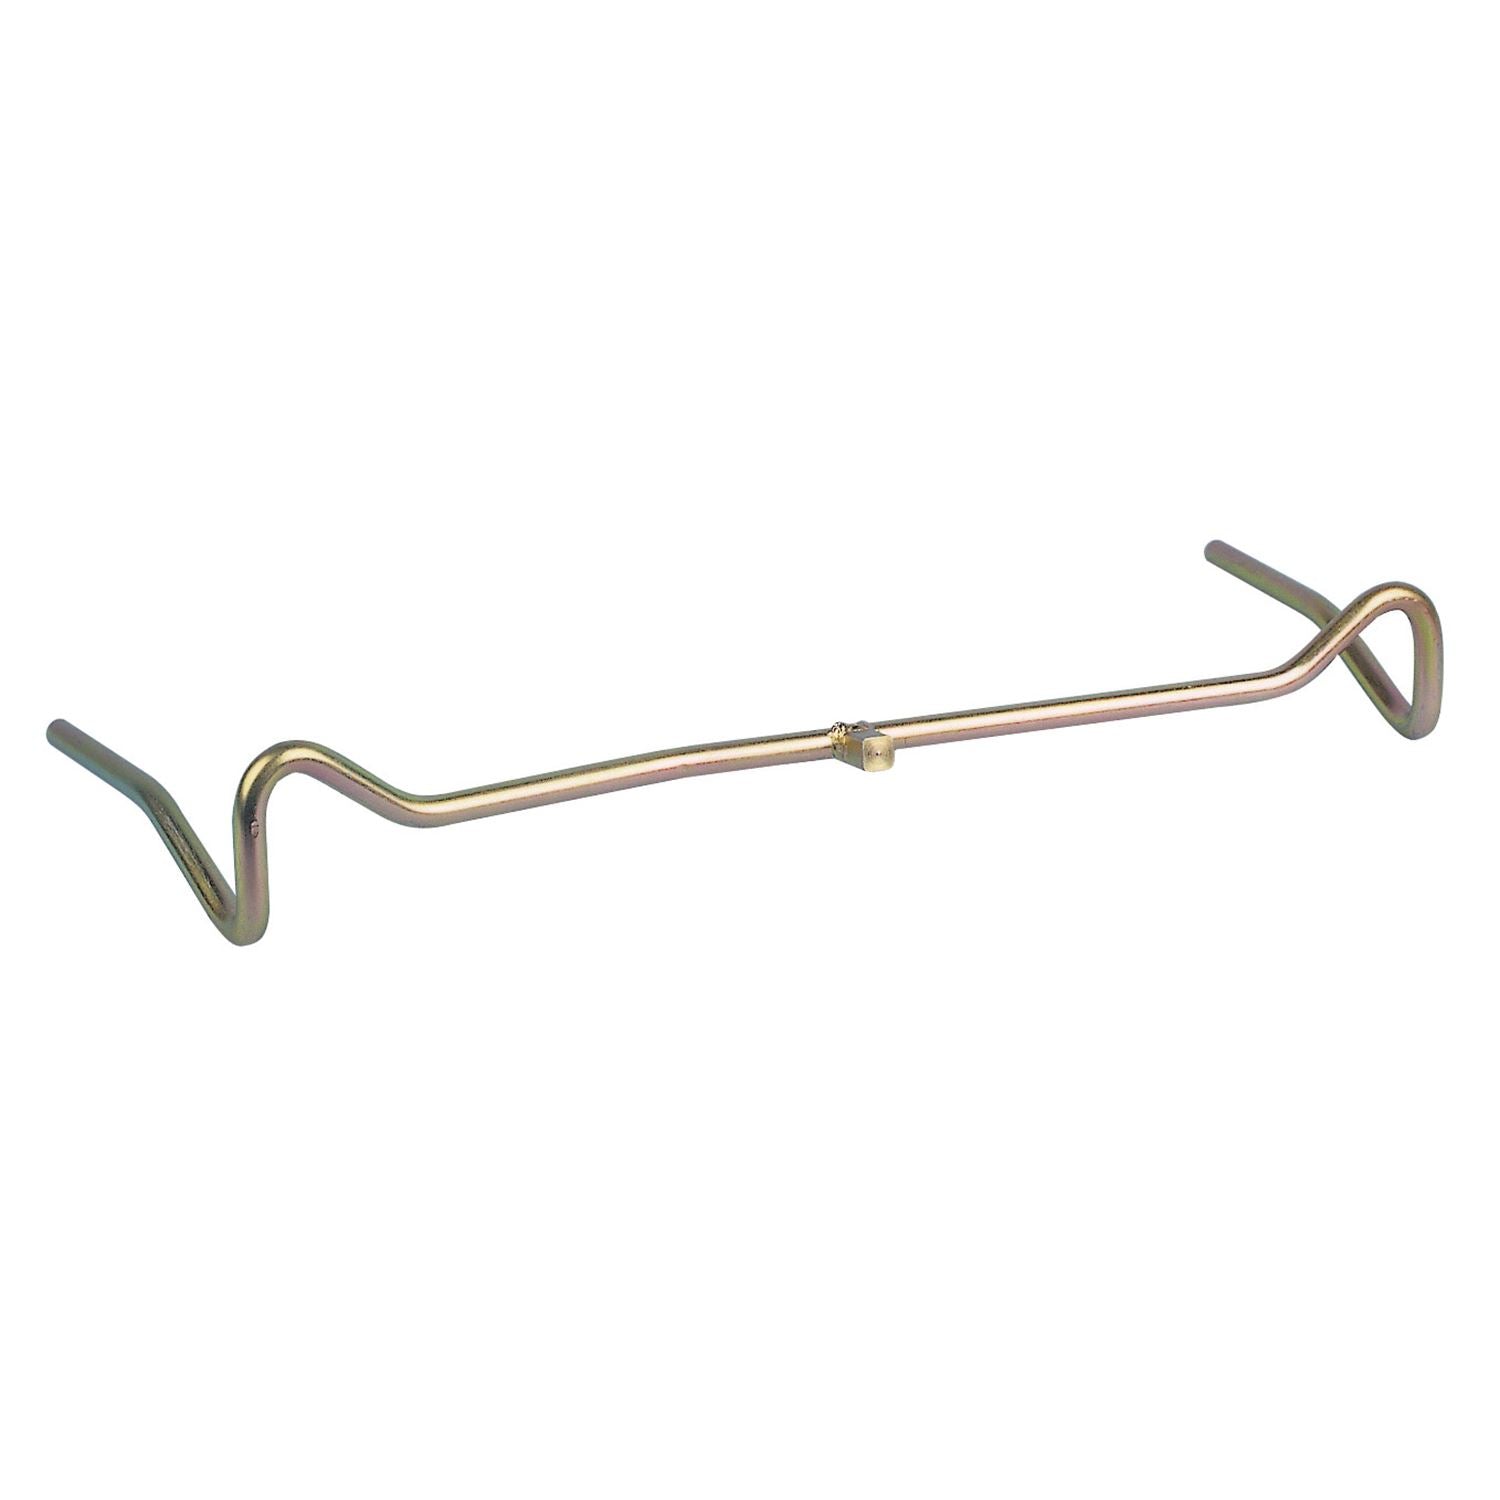 Corral Tension Arm For Use With In-LineStrainer - Just Horse Riders